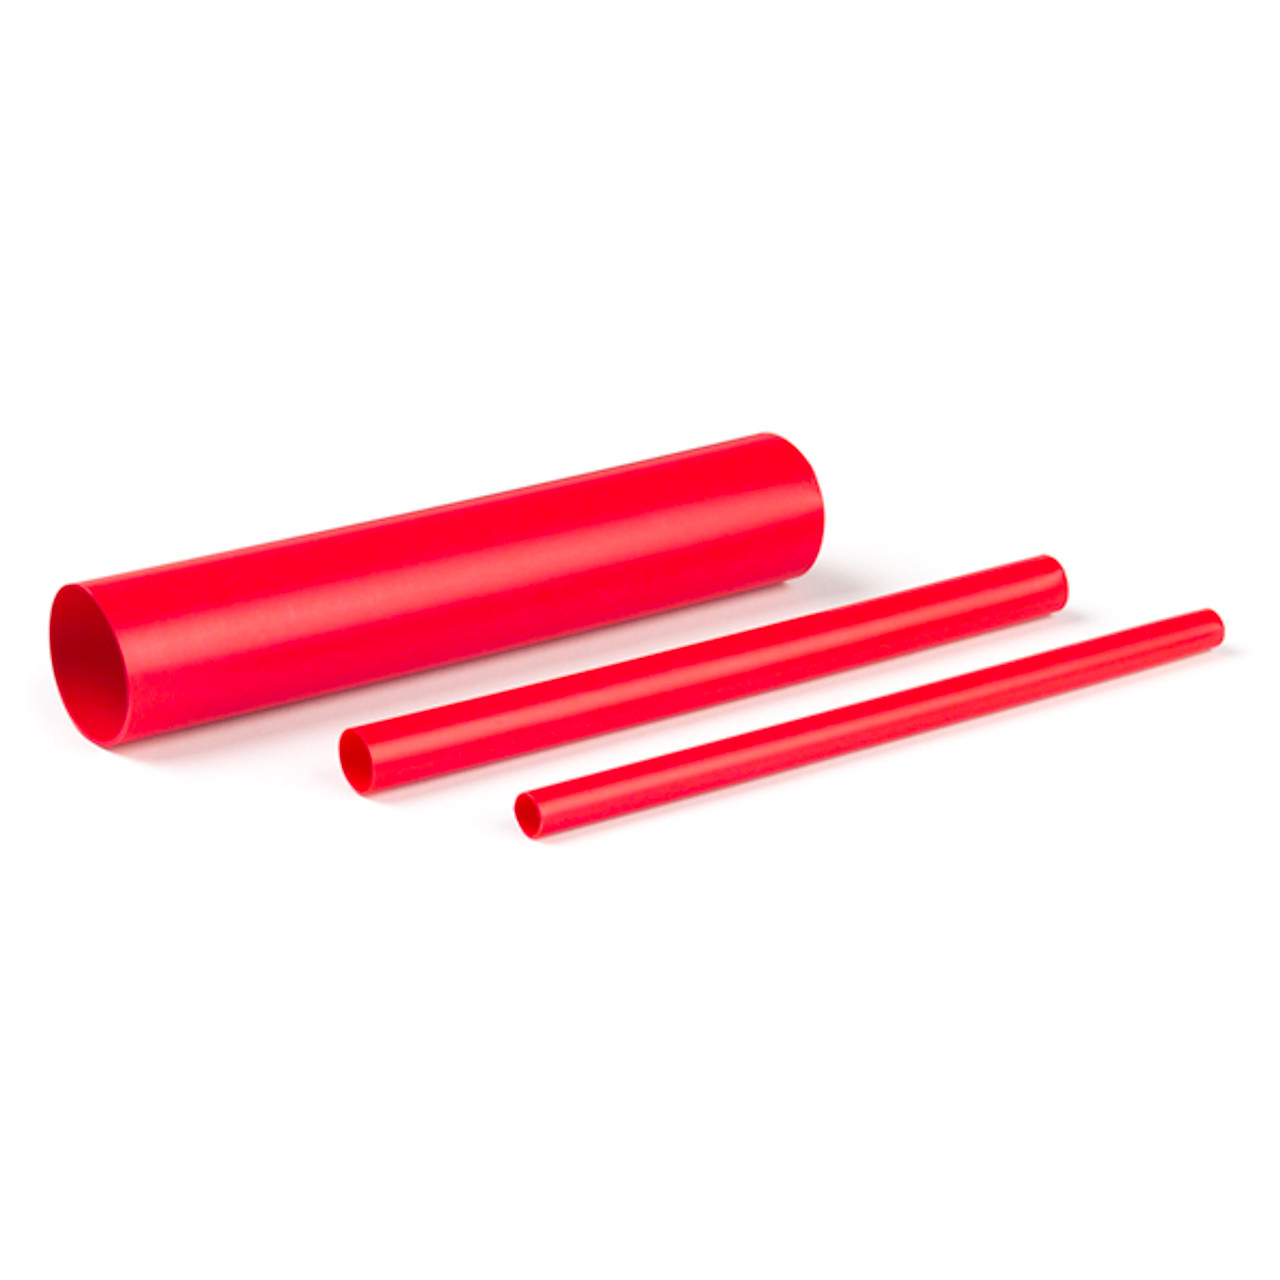 1" Dual Wall 3:1 Heat Shrink Tubing 6" @ 6 Pack - Red  84-6104